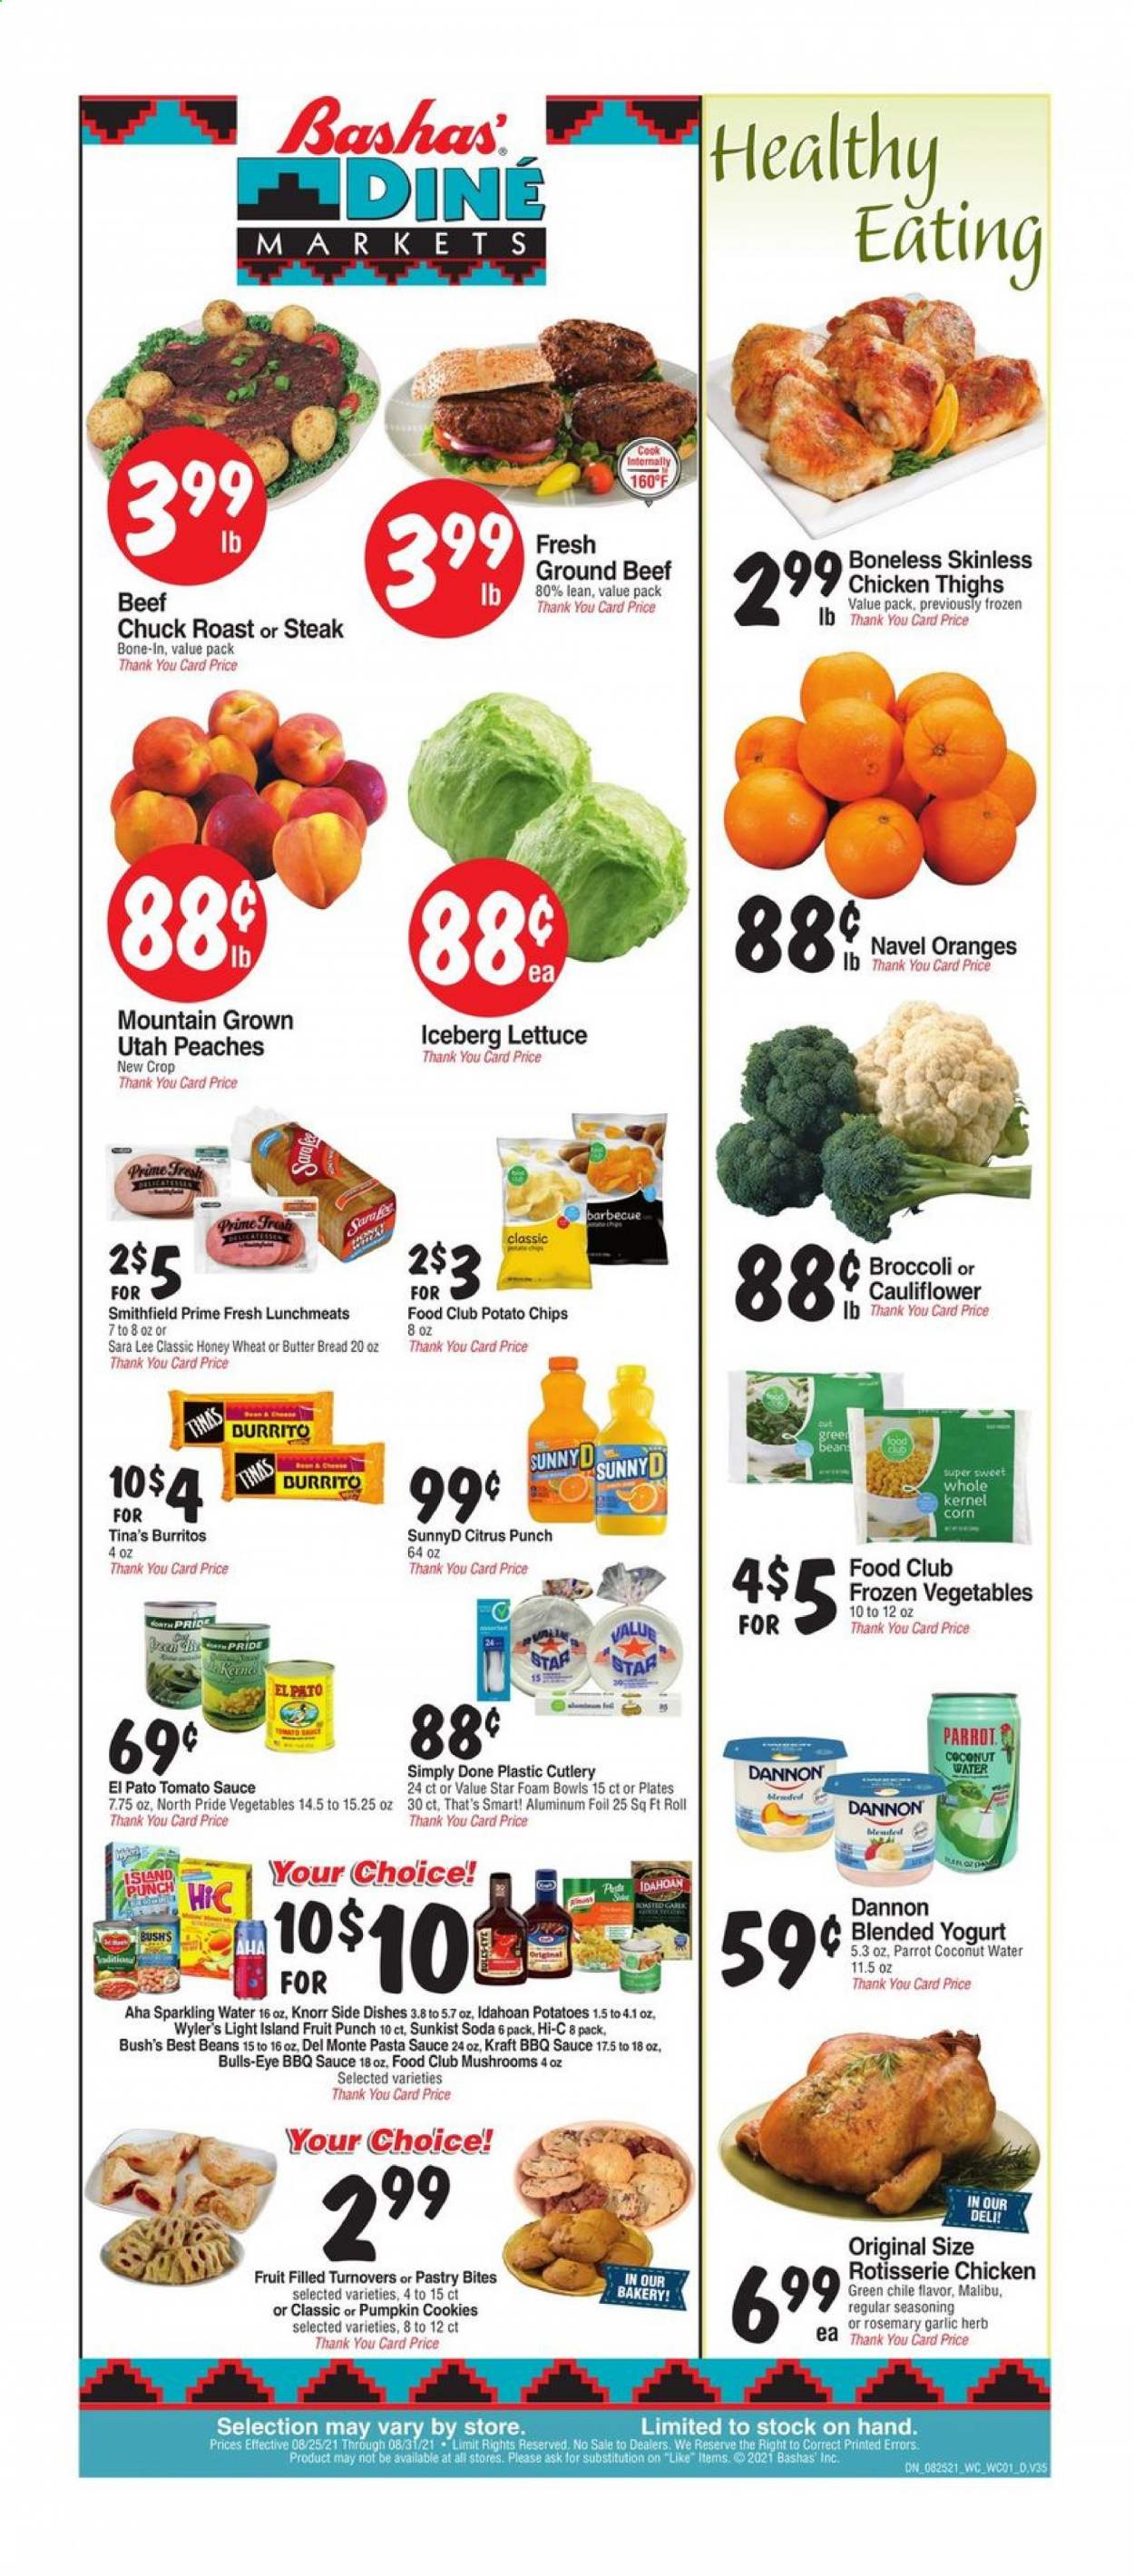 thumbnail - Bashas' Diné Markets Flyer - 08/25/2021 - 08/31/2021 - Sales products - mushrooms, bread, Sara Lee, turnovers, beans, broccoli, corn, garlic, green beans, lettuce, oranges, chicken roast, pasta sauce, Knorr, sauce, burrito, Kraft®, lunch meat, yoghurt, Dannon, frozen vegetables, cookies, potato chips, tomato sauce, rosemary, spice, herbs, BBQ sauce, Hi-c, coconut water, fruit punch, soda, sparkling water, Malibu, chicken thighs, beef meat, ground beef, steak, chuck roast, peaches, navel oranges. Page 1.